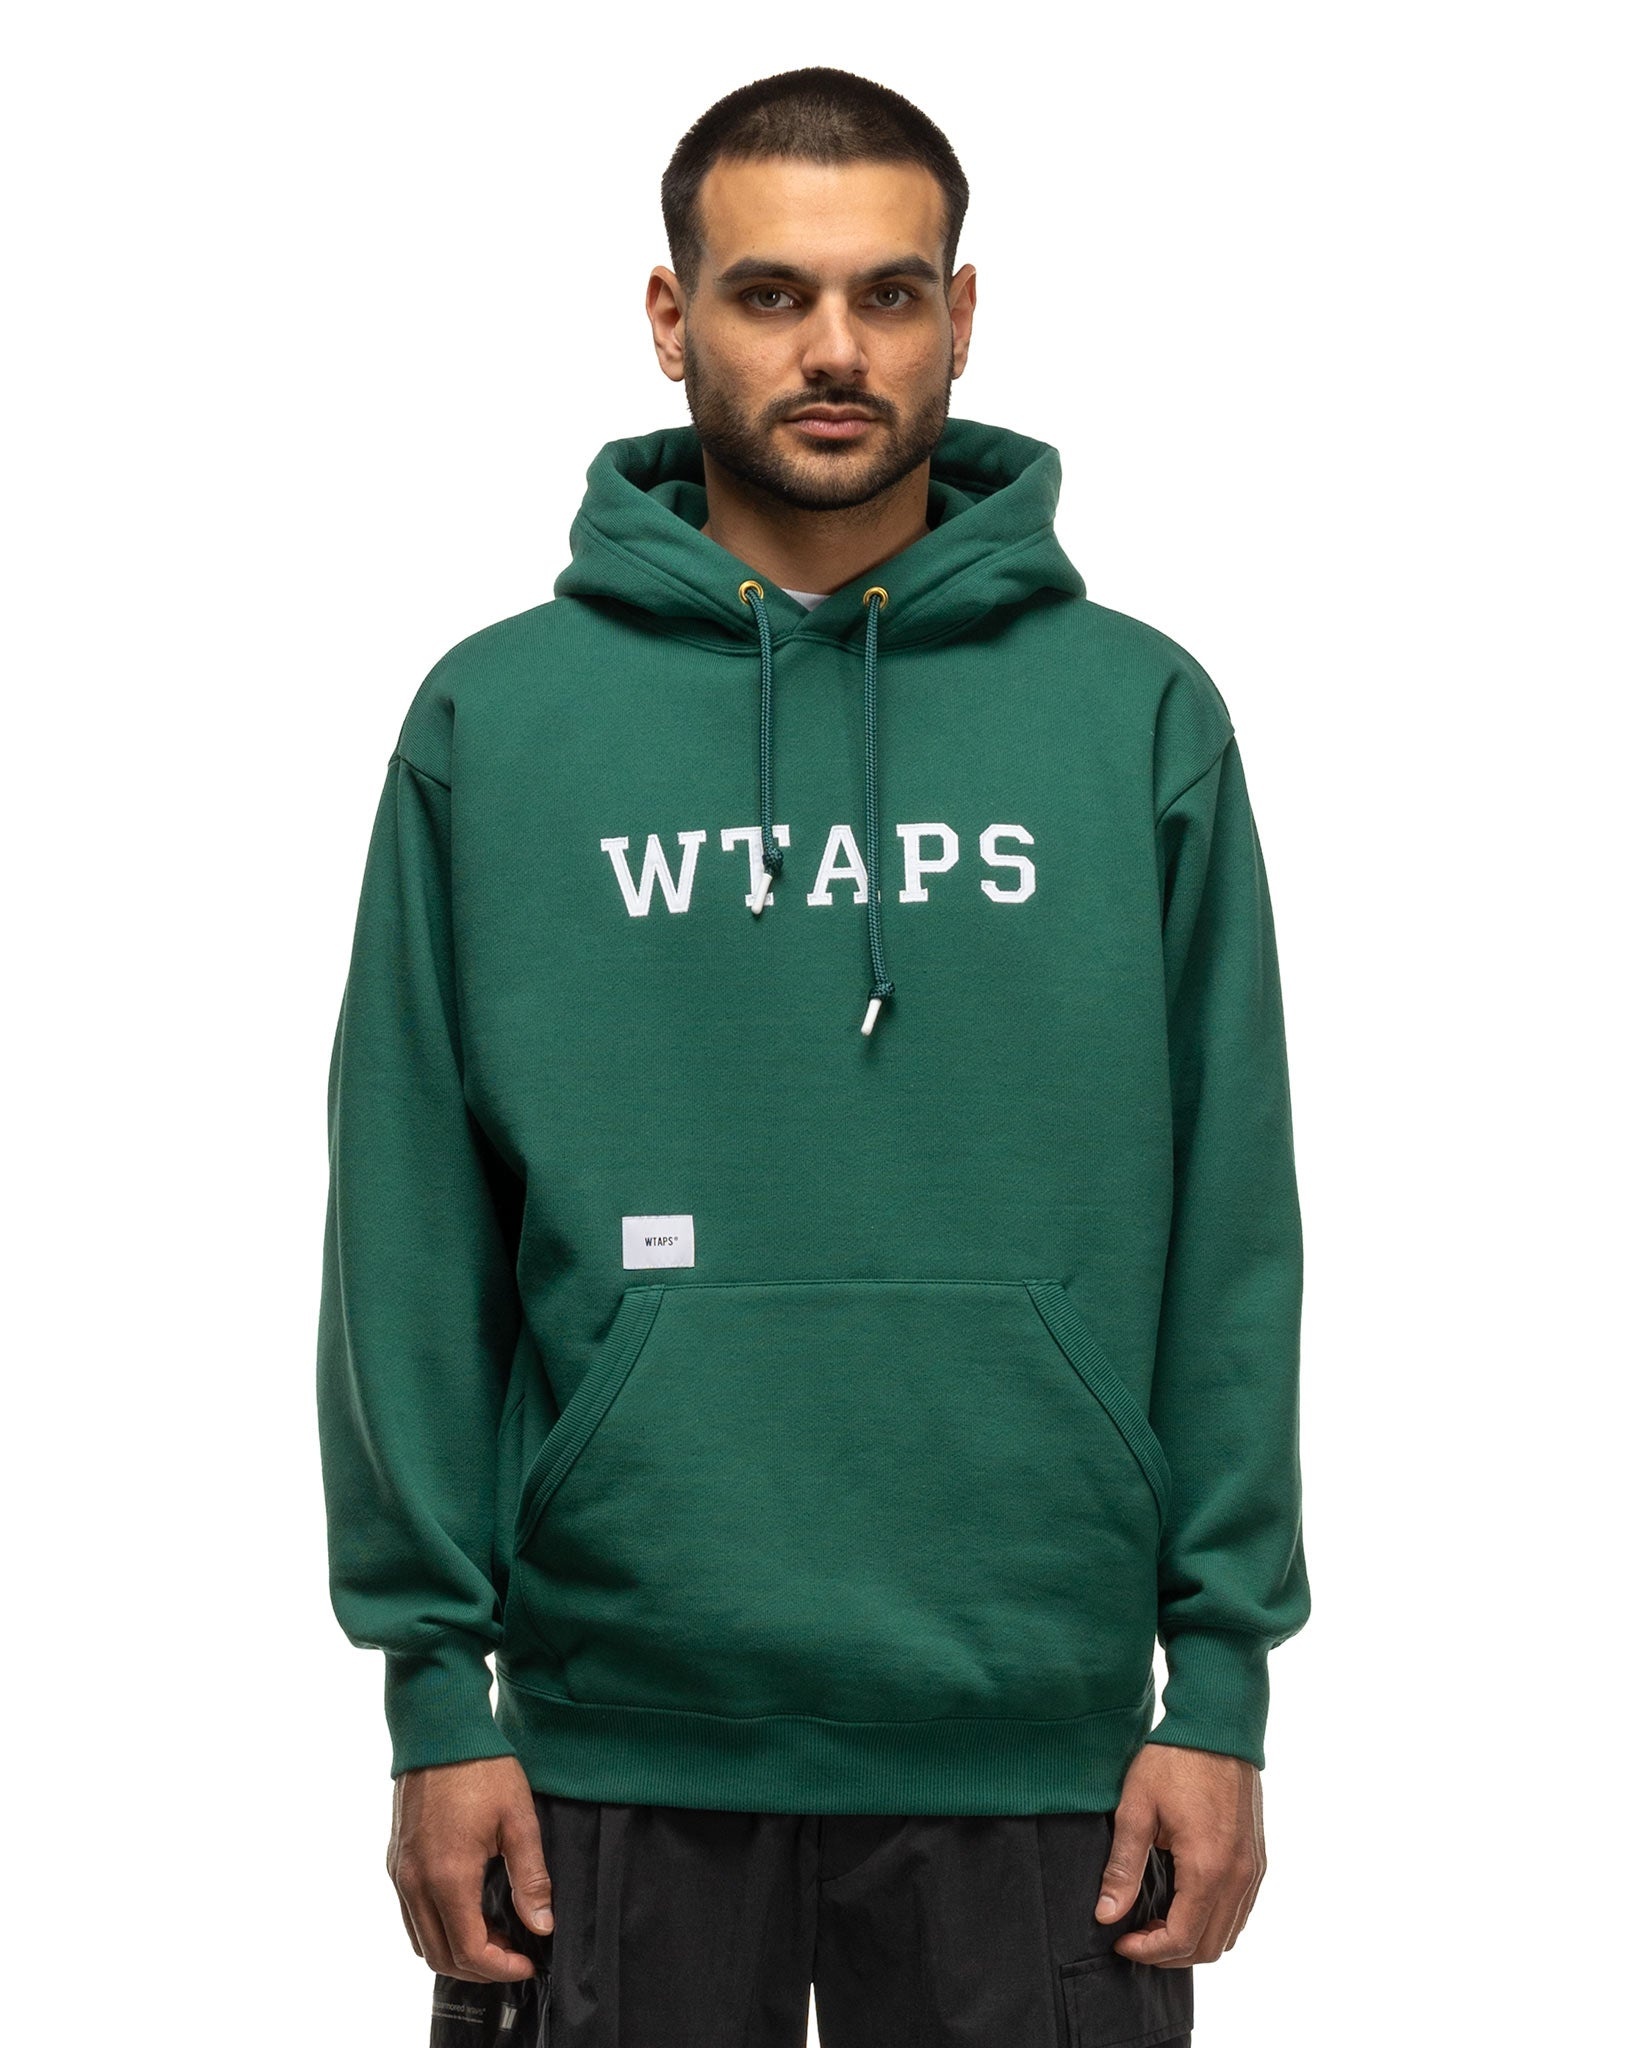 Academy / Hoody / Cotton. College Green - 4